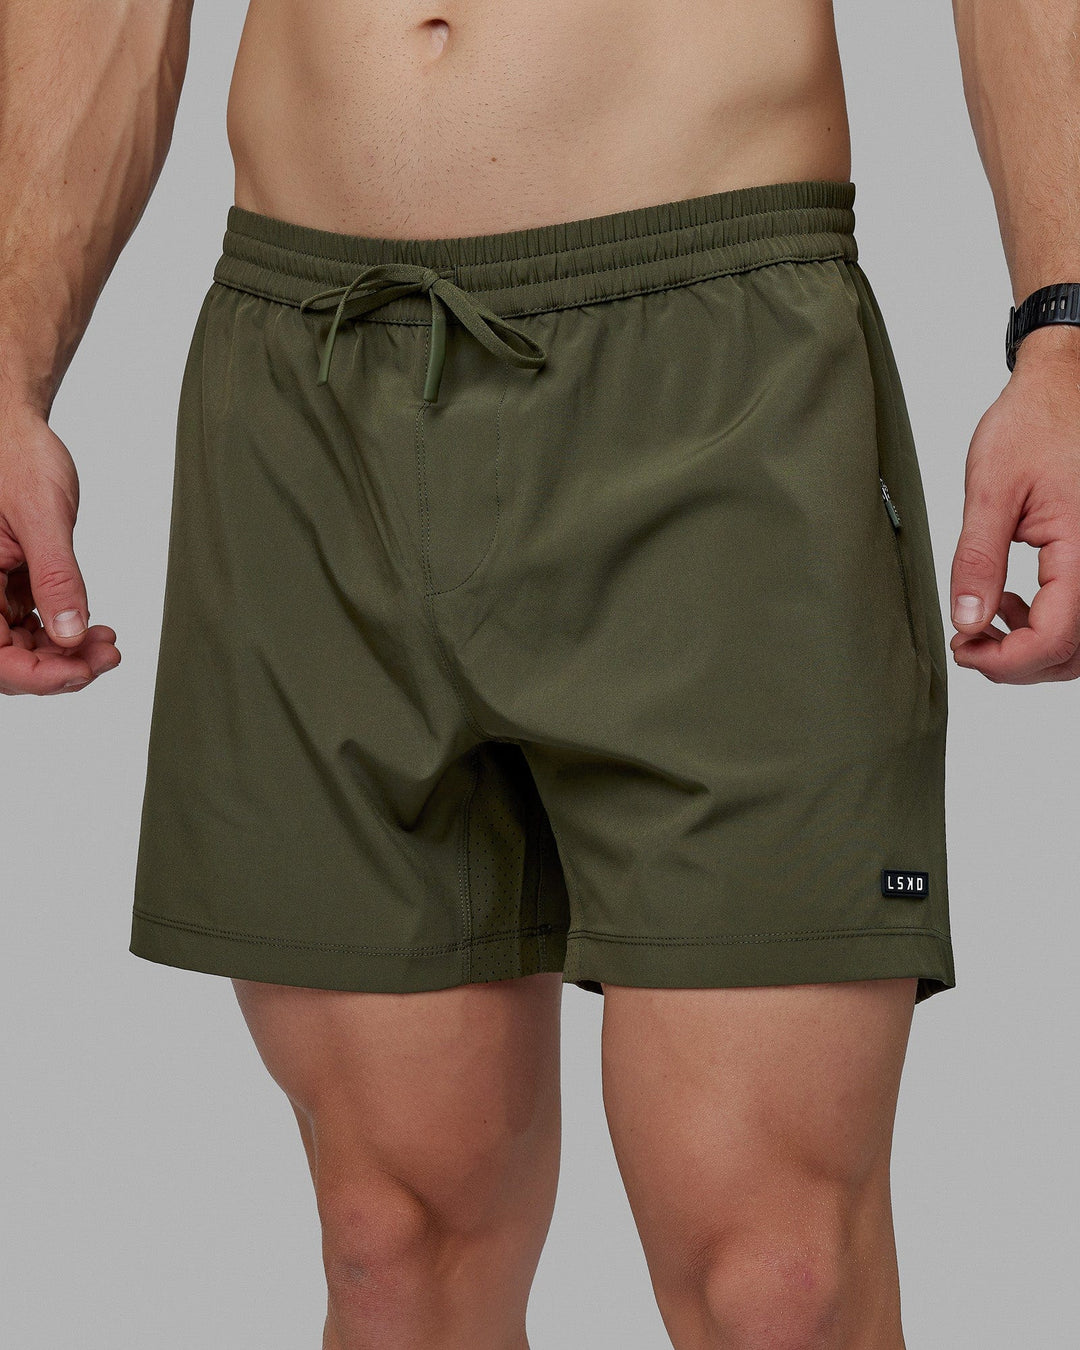 Man wearing Rep 5" Lined Performance Short - Forest Night